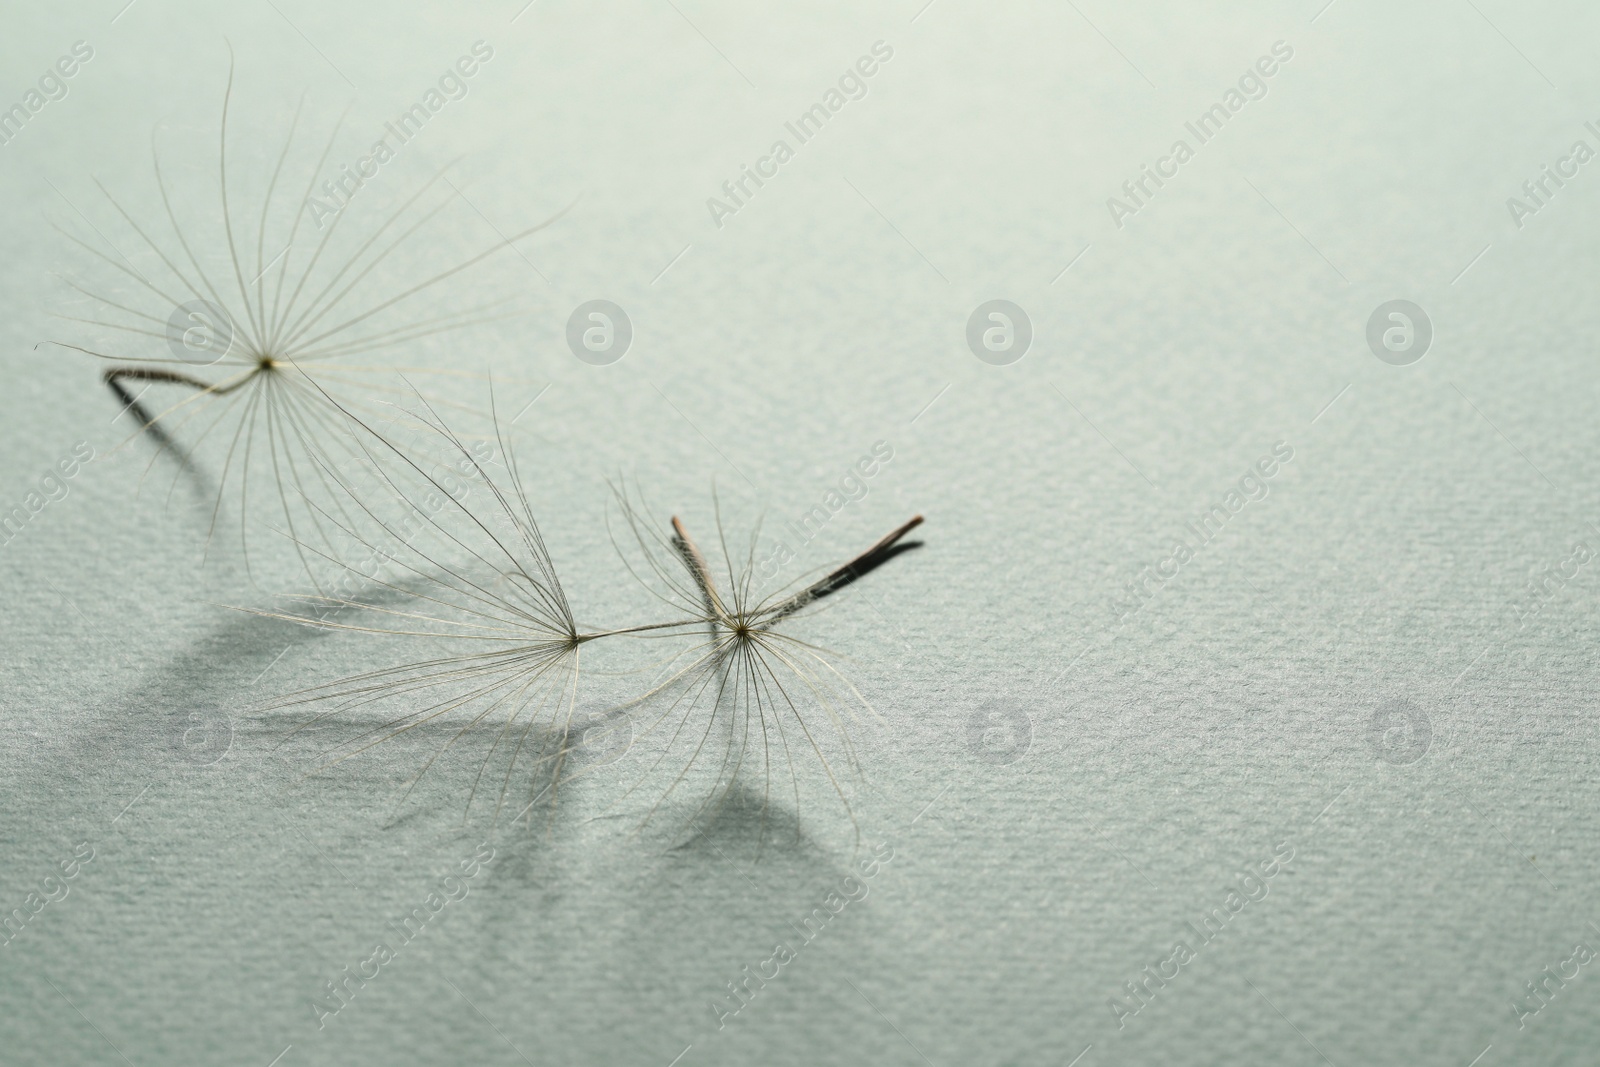 Photo of Seeds of dandelion flower on light background, space for text